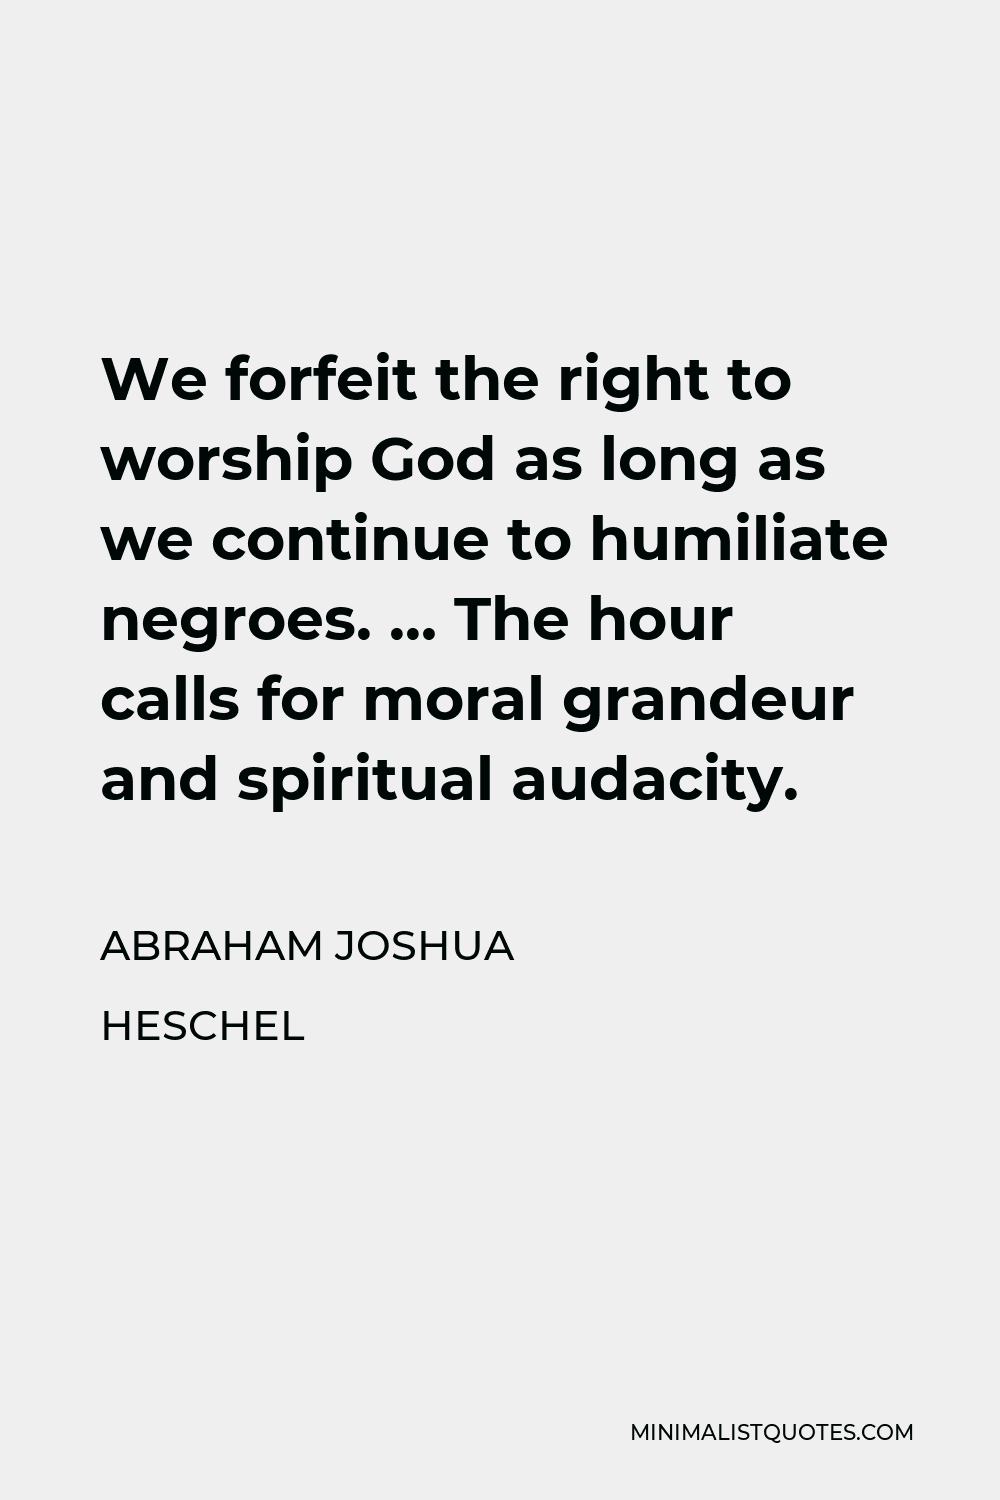 Abraham Joshua Heschel Quote - We forfeit the right to worship God as long as we continue to humiliate negroes. … The hour calls for moral grandeur and spiritual audacity.